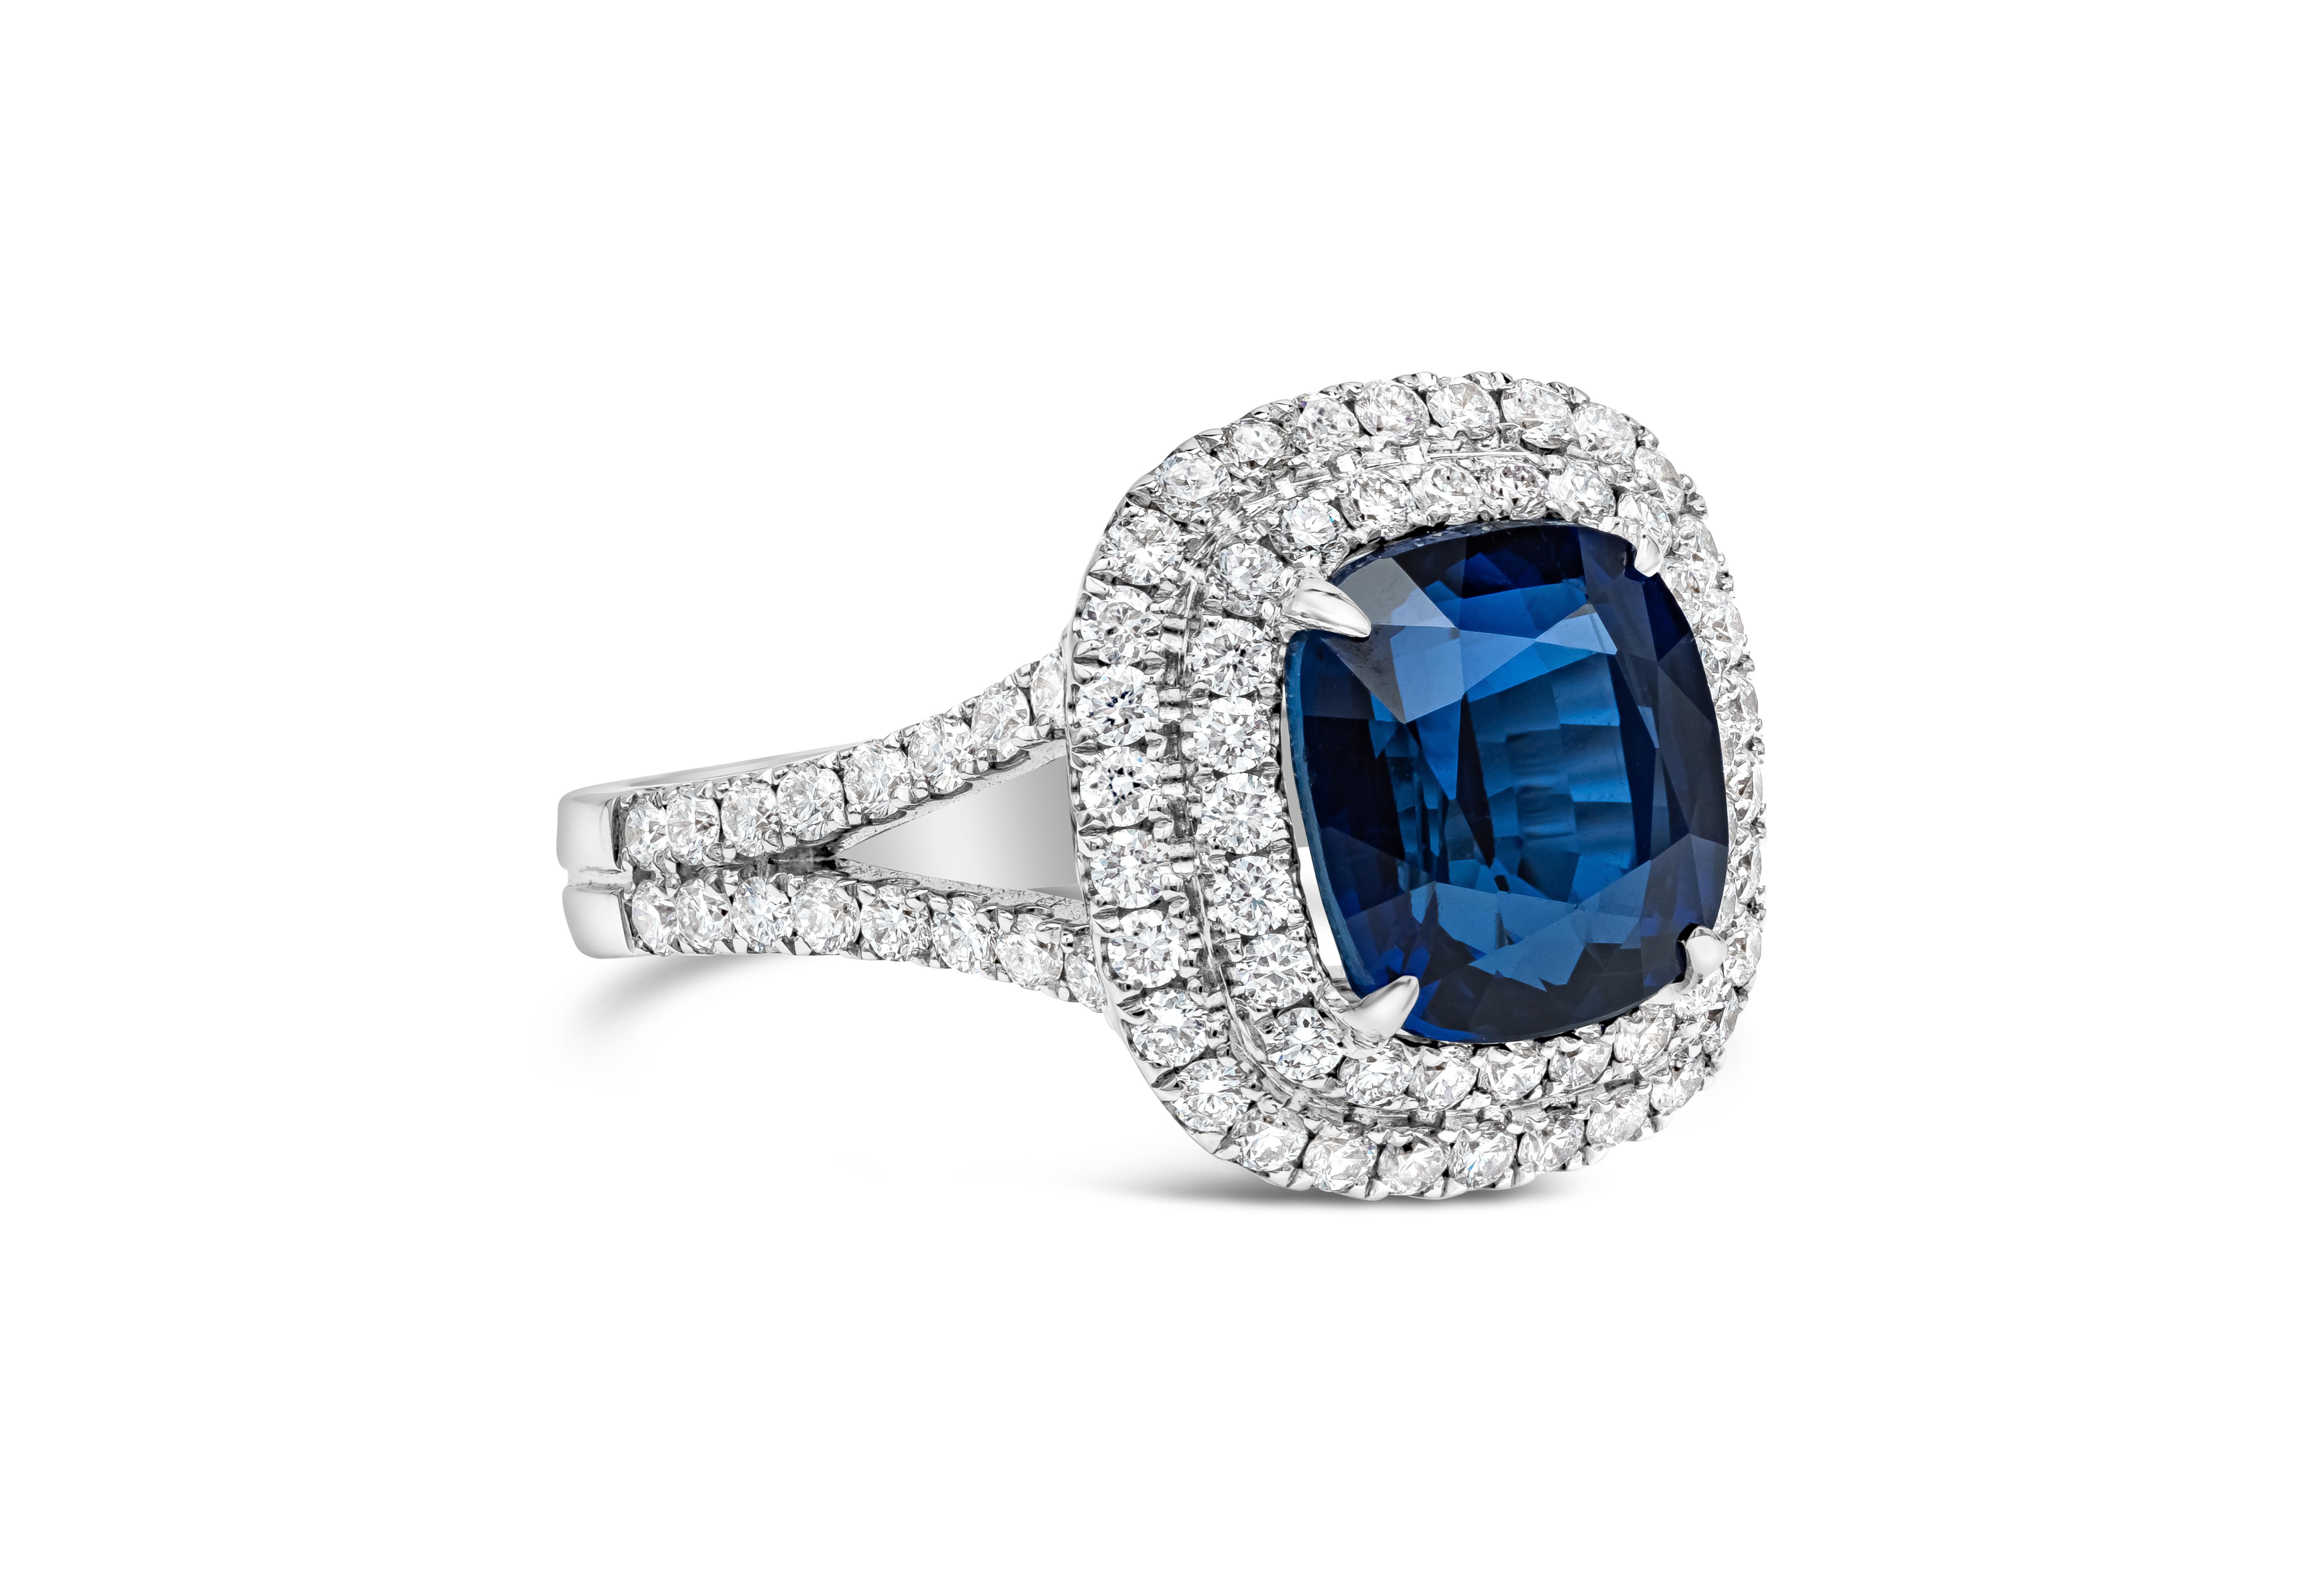 Features a color-rich cushion cut blue sapphire weighing 5.05 carats, surrounded by two rows of round brilliant diamonds in an 18k white gold split-shank mounting accented with diamonds. Accent diamonds weigh 1.00 carats total. Sapphire is certified